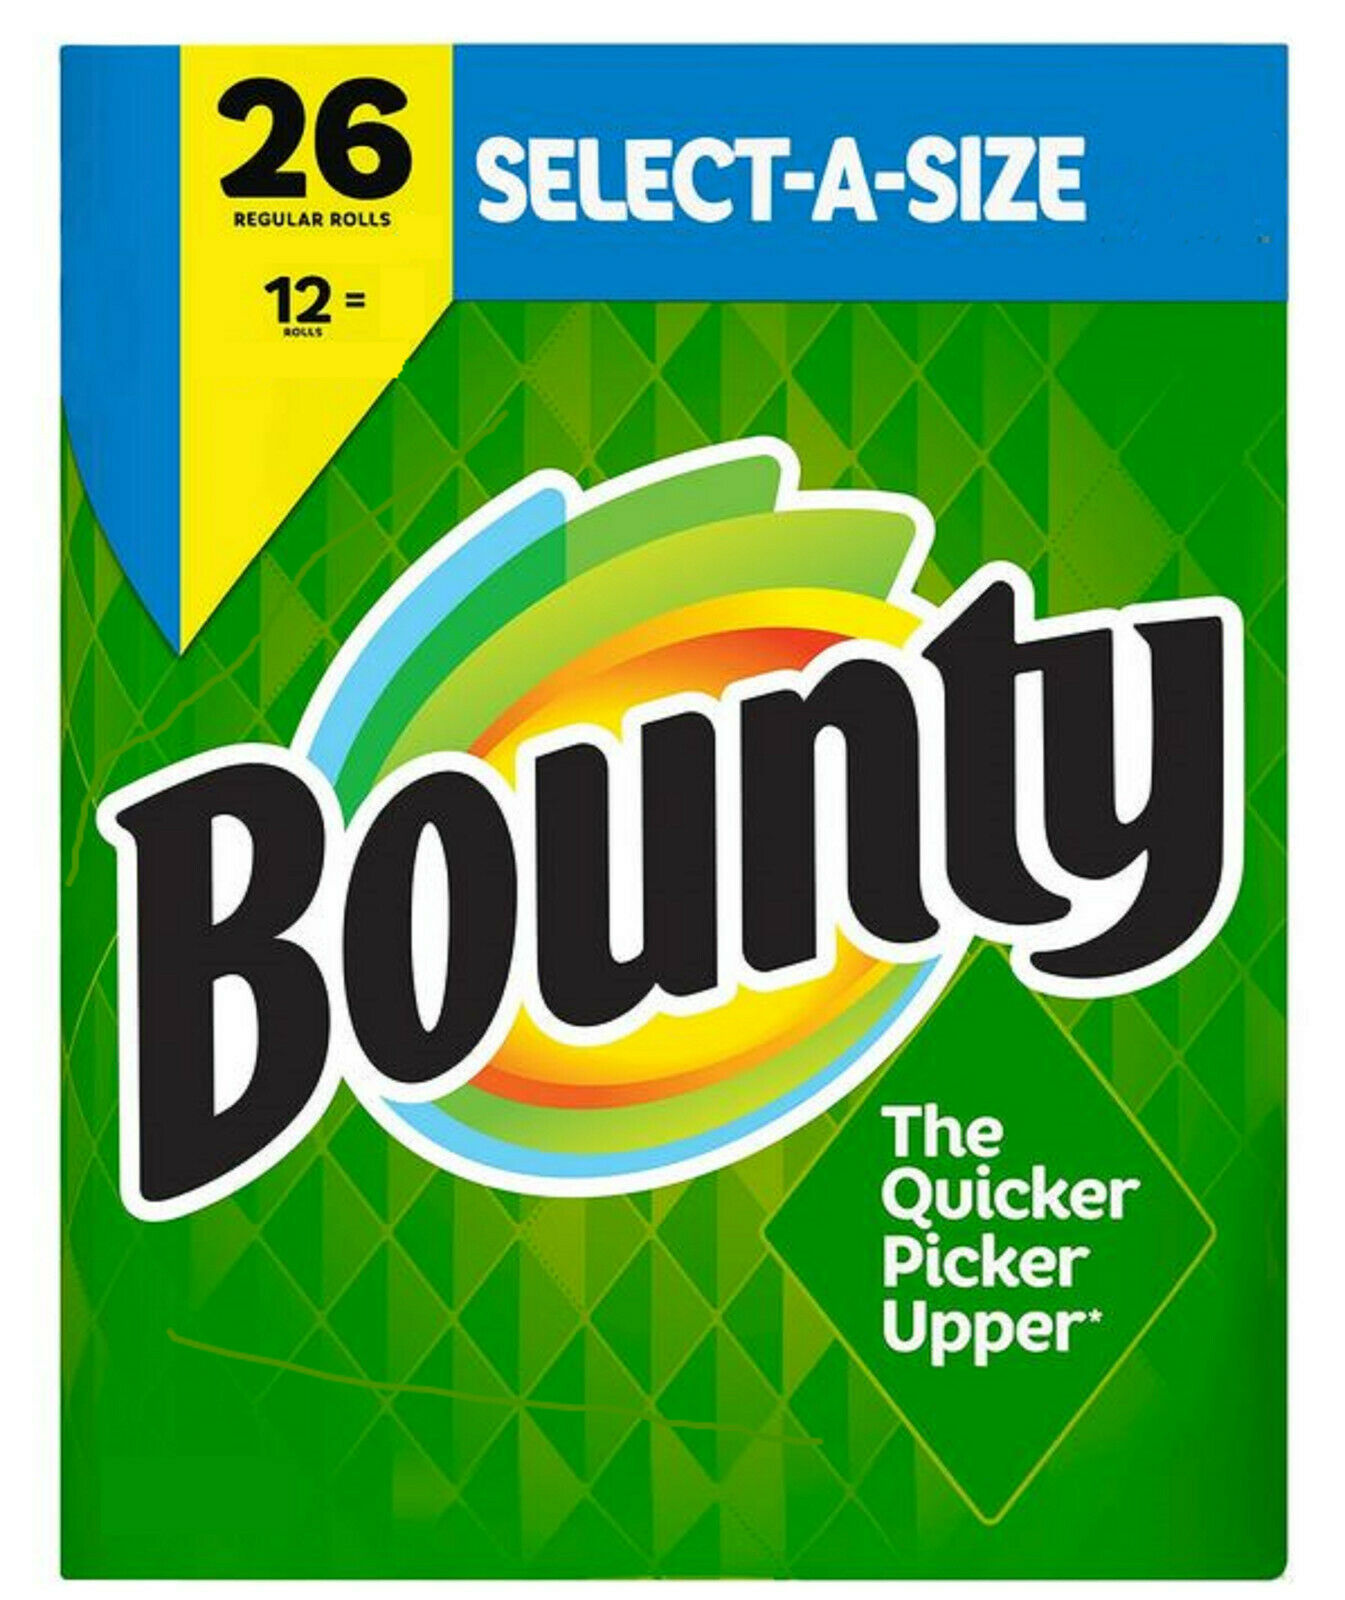 Bounty Select-A-Size Paper Towels, White,12 Rolls = 26 Regular Rolls